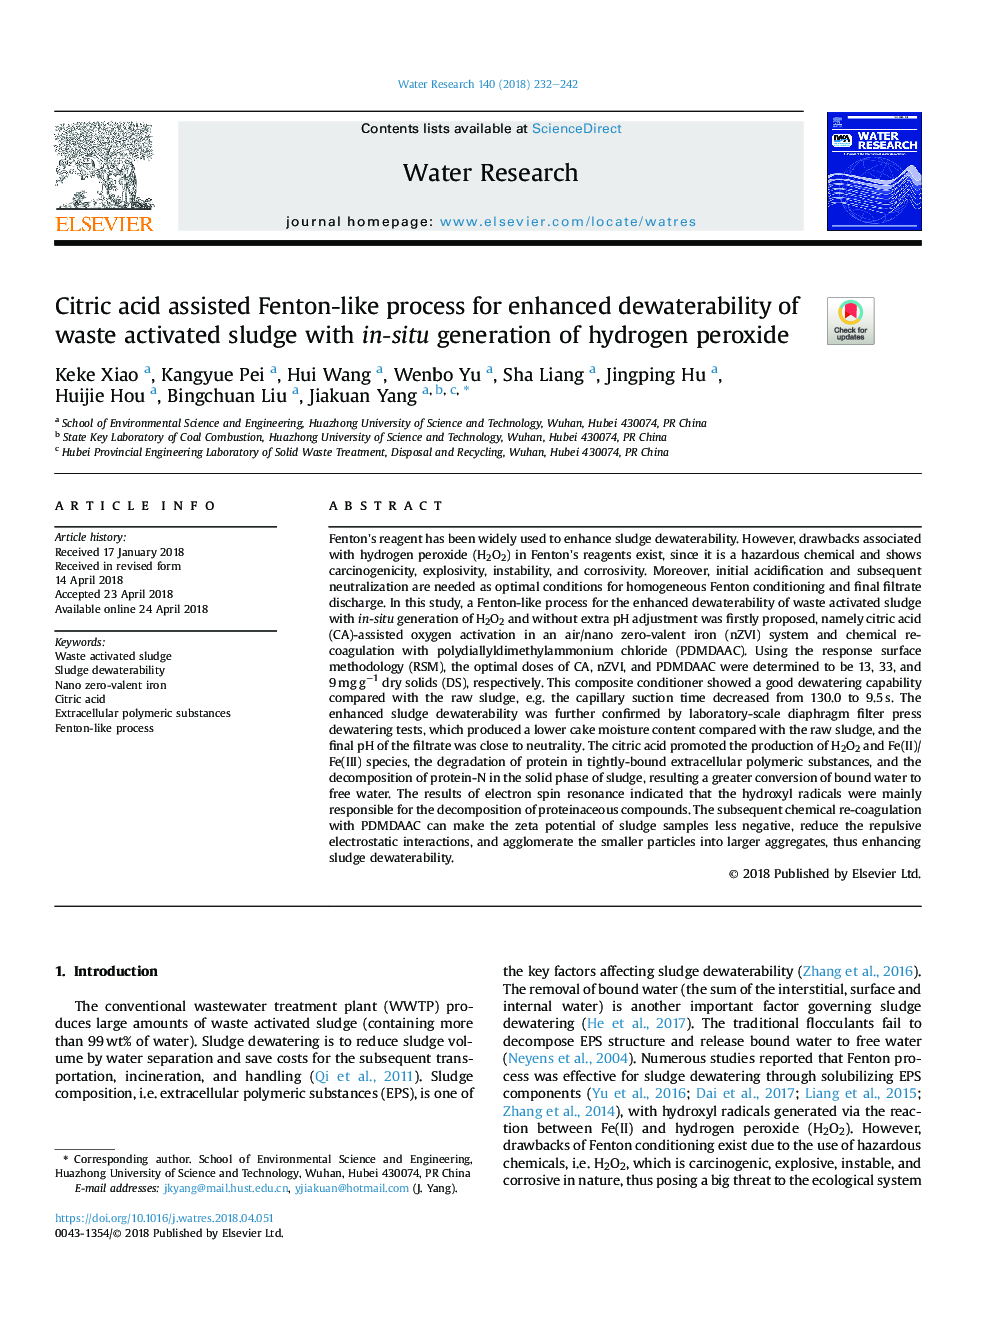 Citric acid assisted Fenton-like process for enhanced dewaterability of waste activated sludge with in-situ generation of hydrogen peroxide